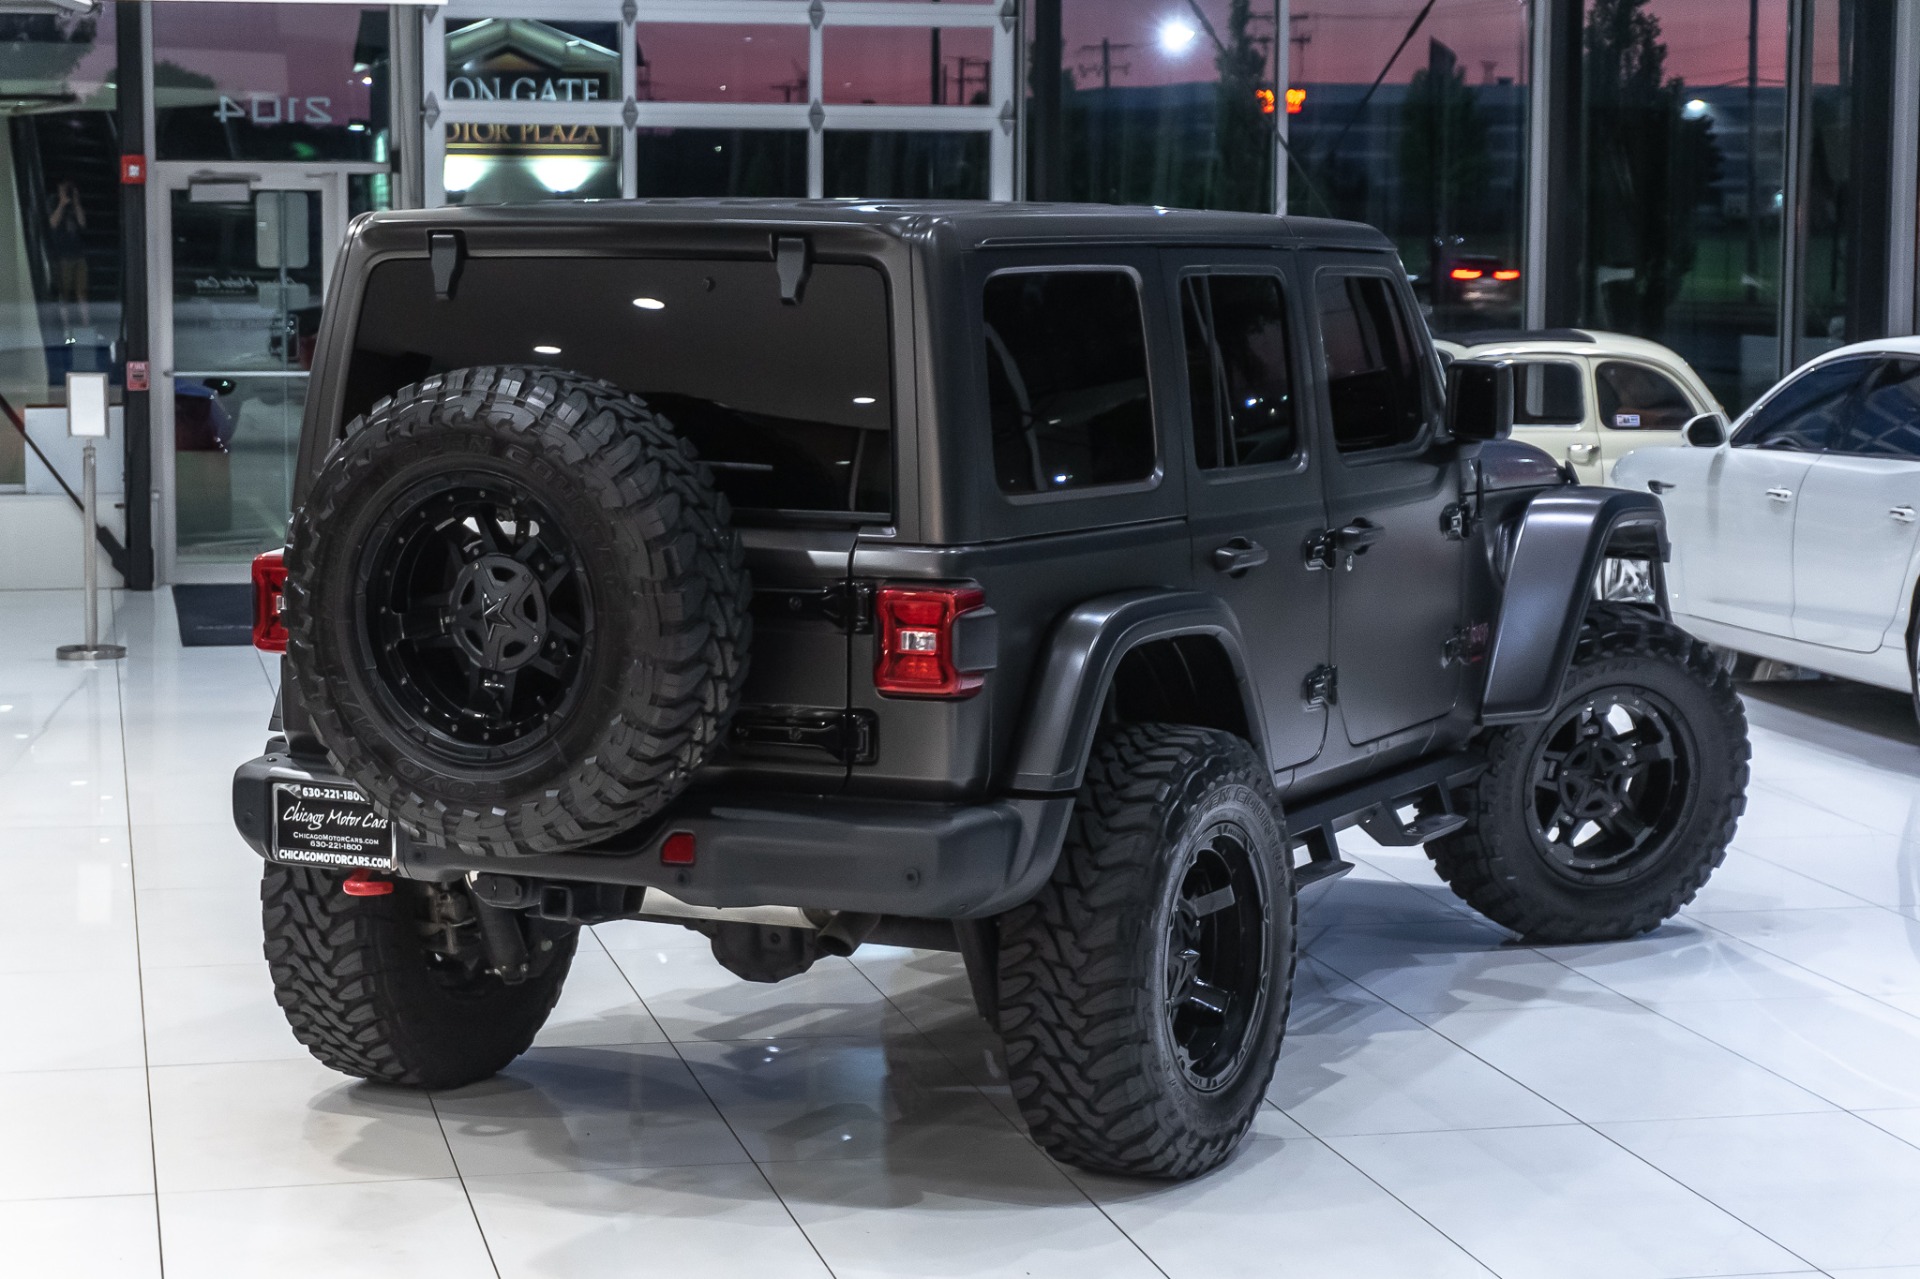 Used 2018 Jeep Wrangler Unlimited Rubicon JL Upgrades